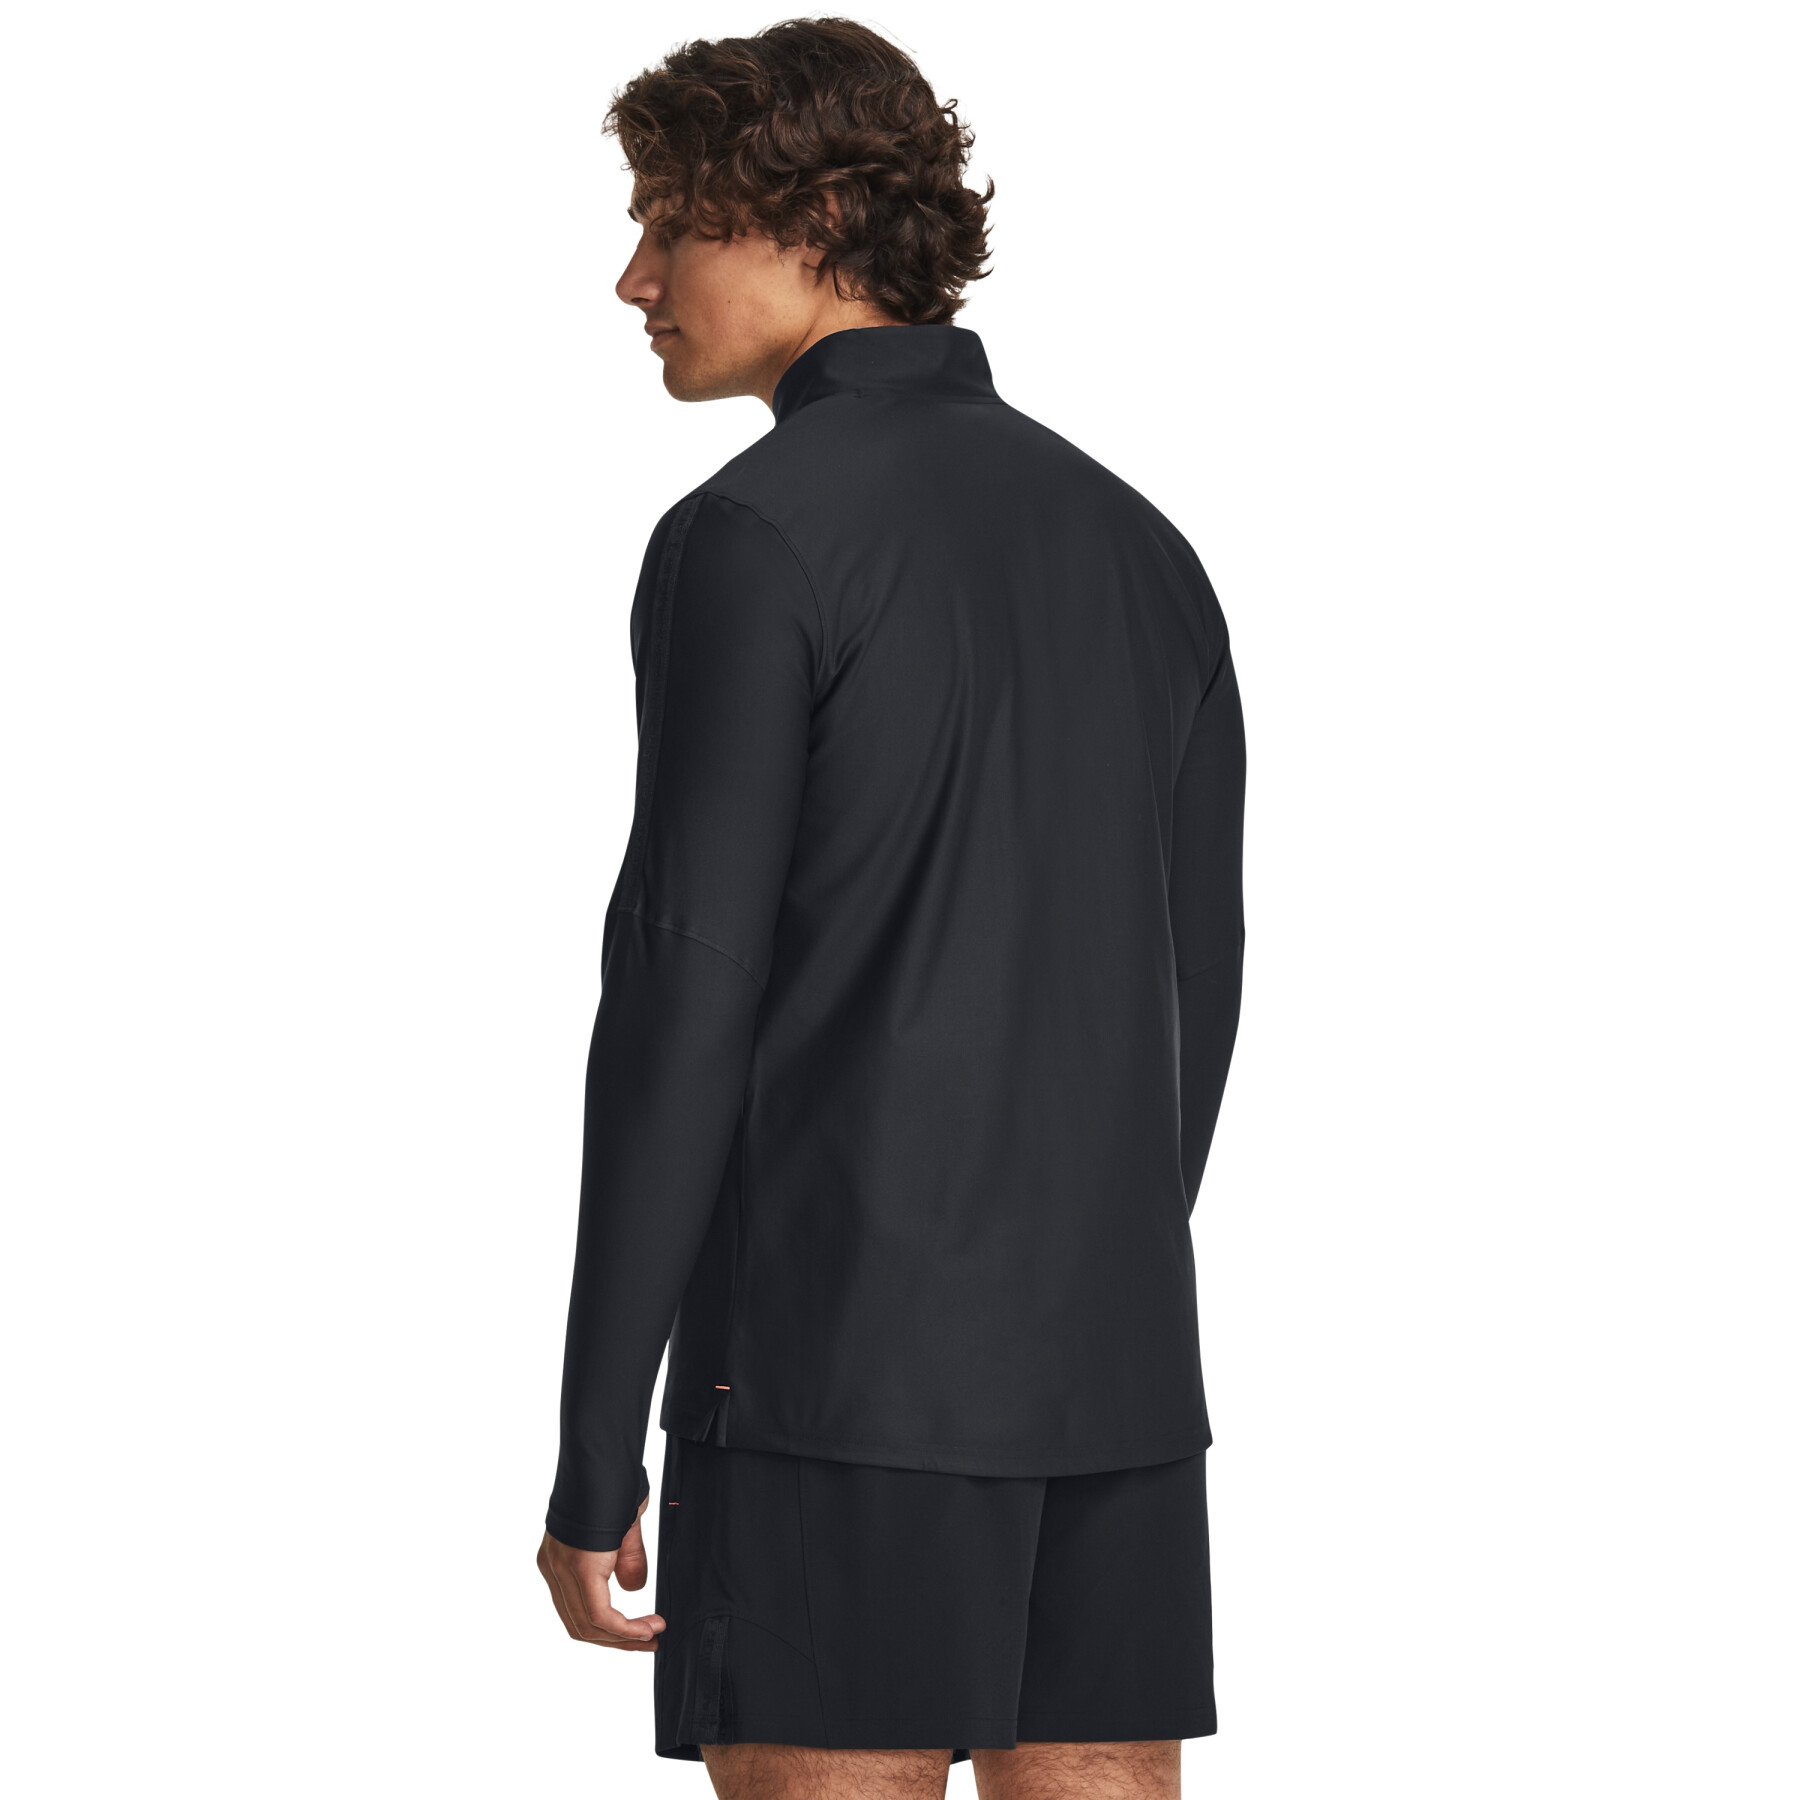 Long-sleeved 1/4 zip athletic top Under Armour Challenger Pro